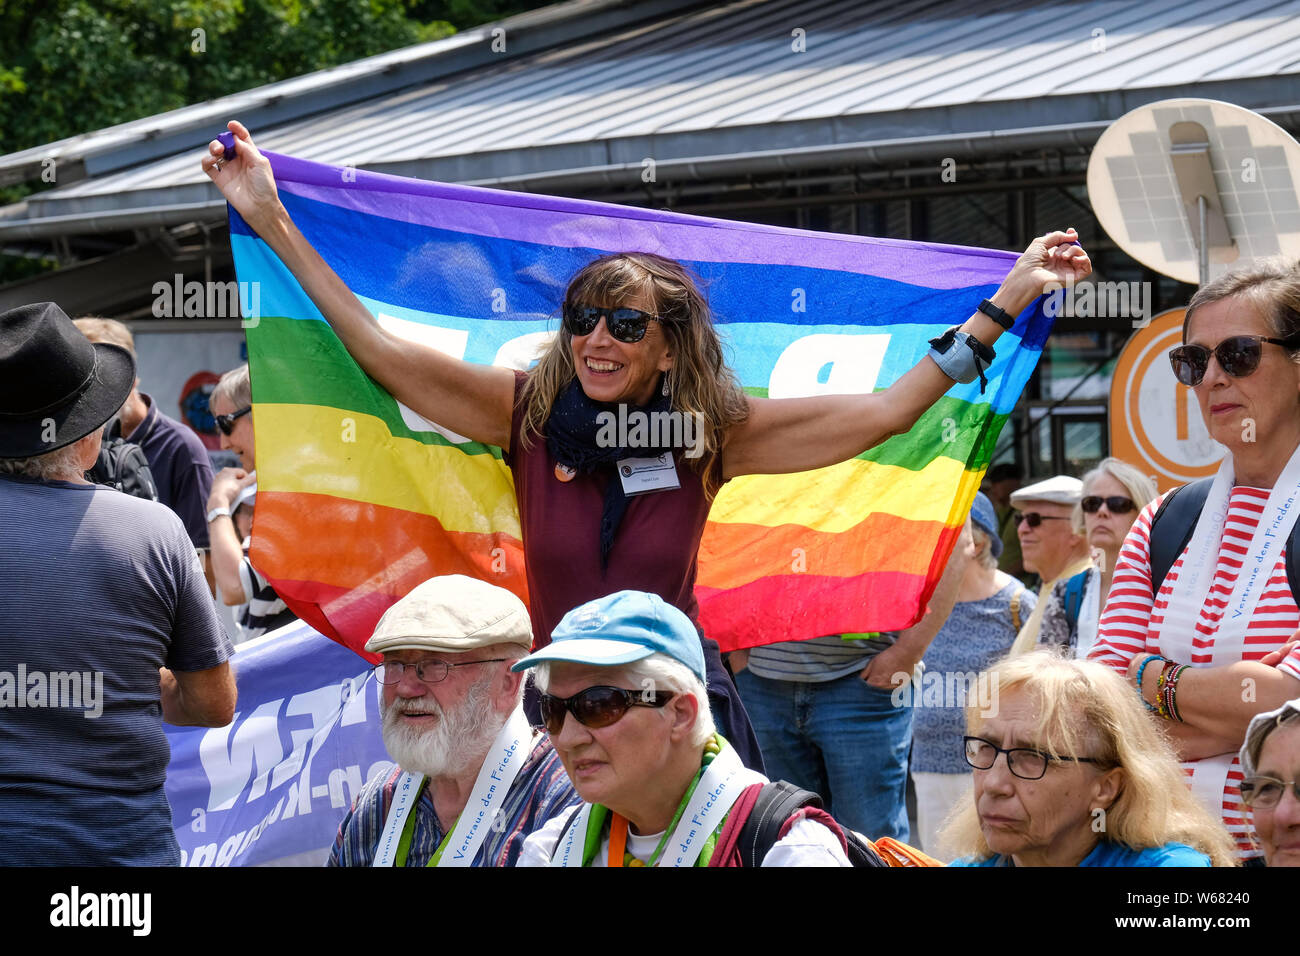 Peace activists with flag with the slogan 'PACE' during a peace demonstration at the German Protestant Church Congress 2019 in Dortmund, Germany Stock Photo